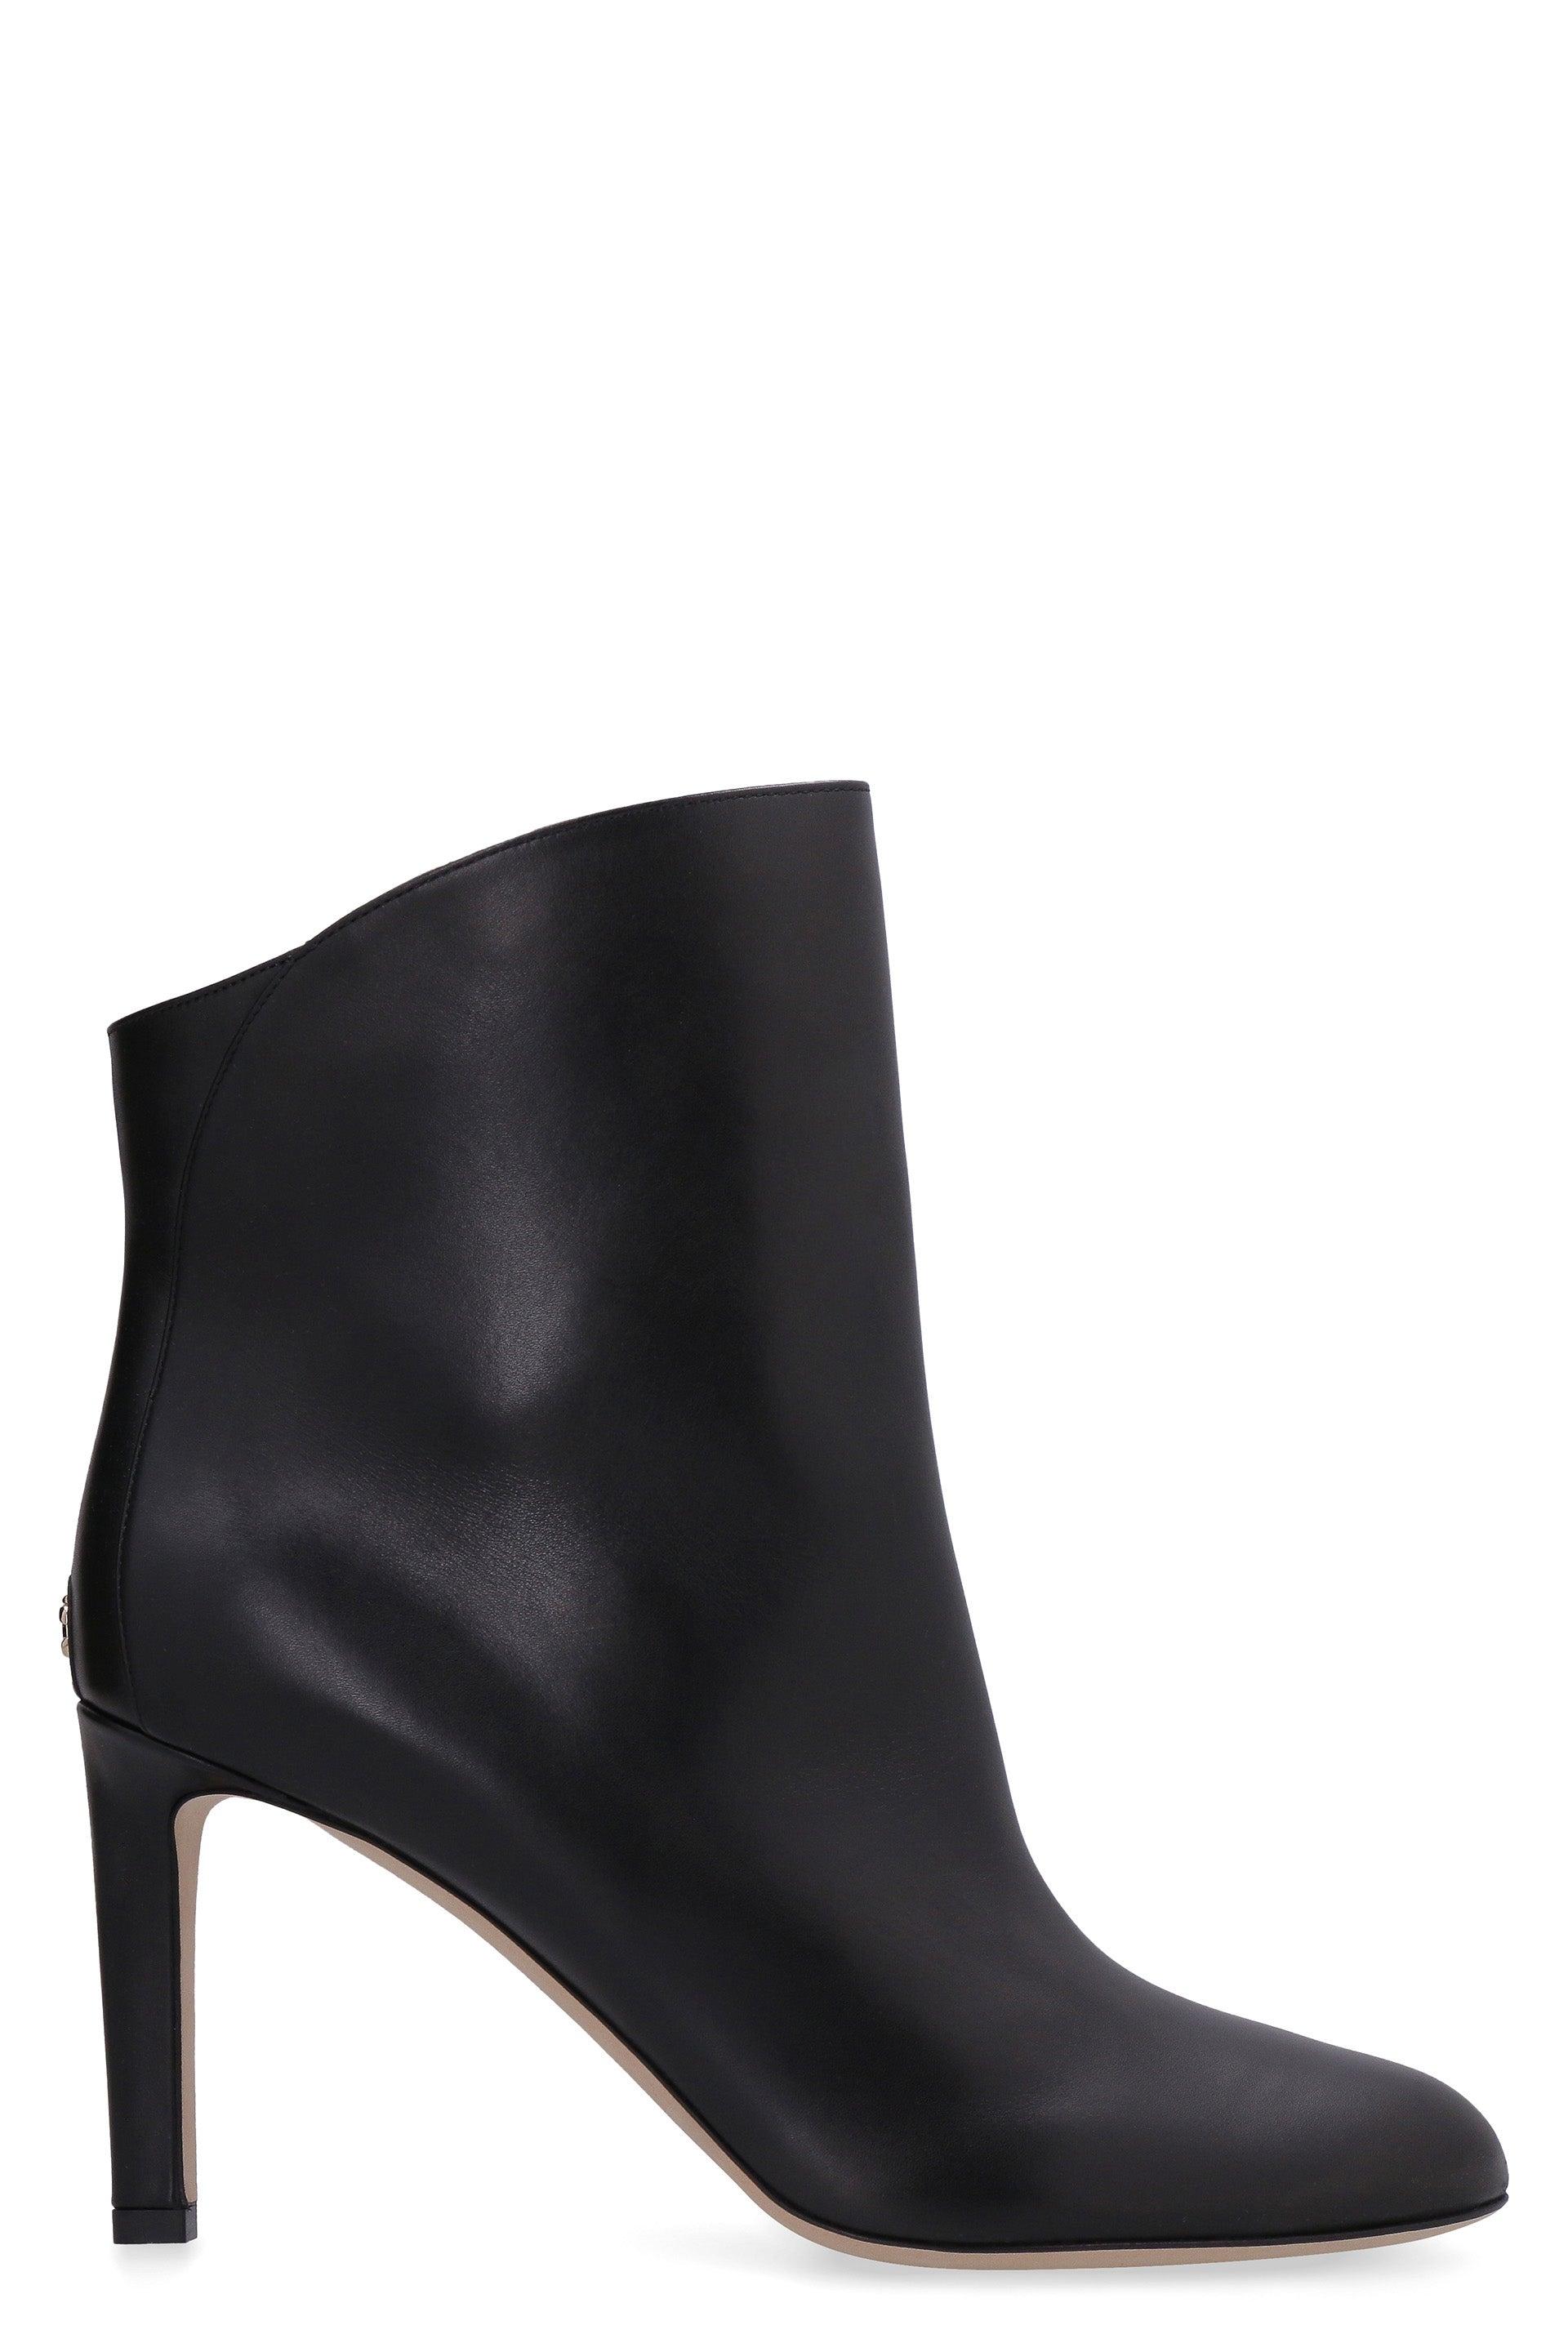 Jimmy Choo Karter Leather Ankle Boots in Black | Lyst